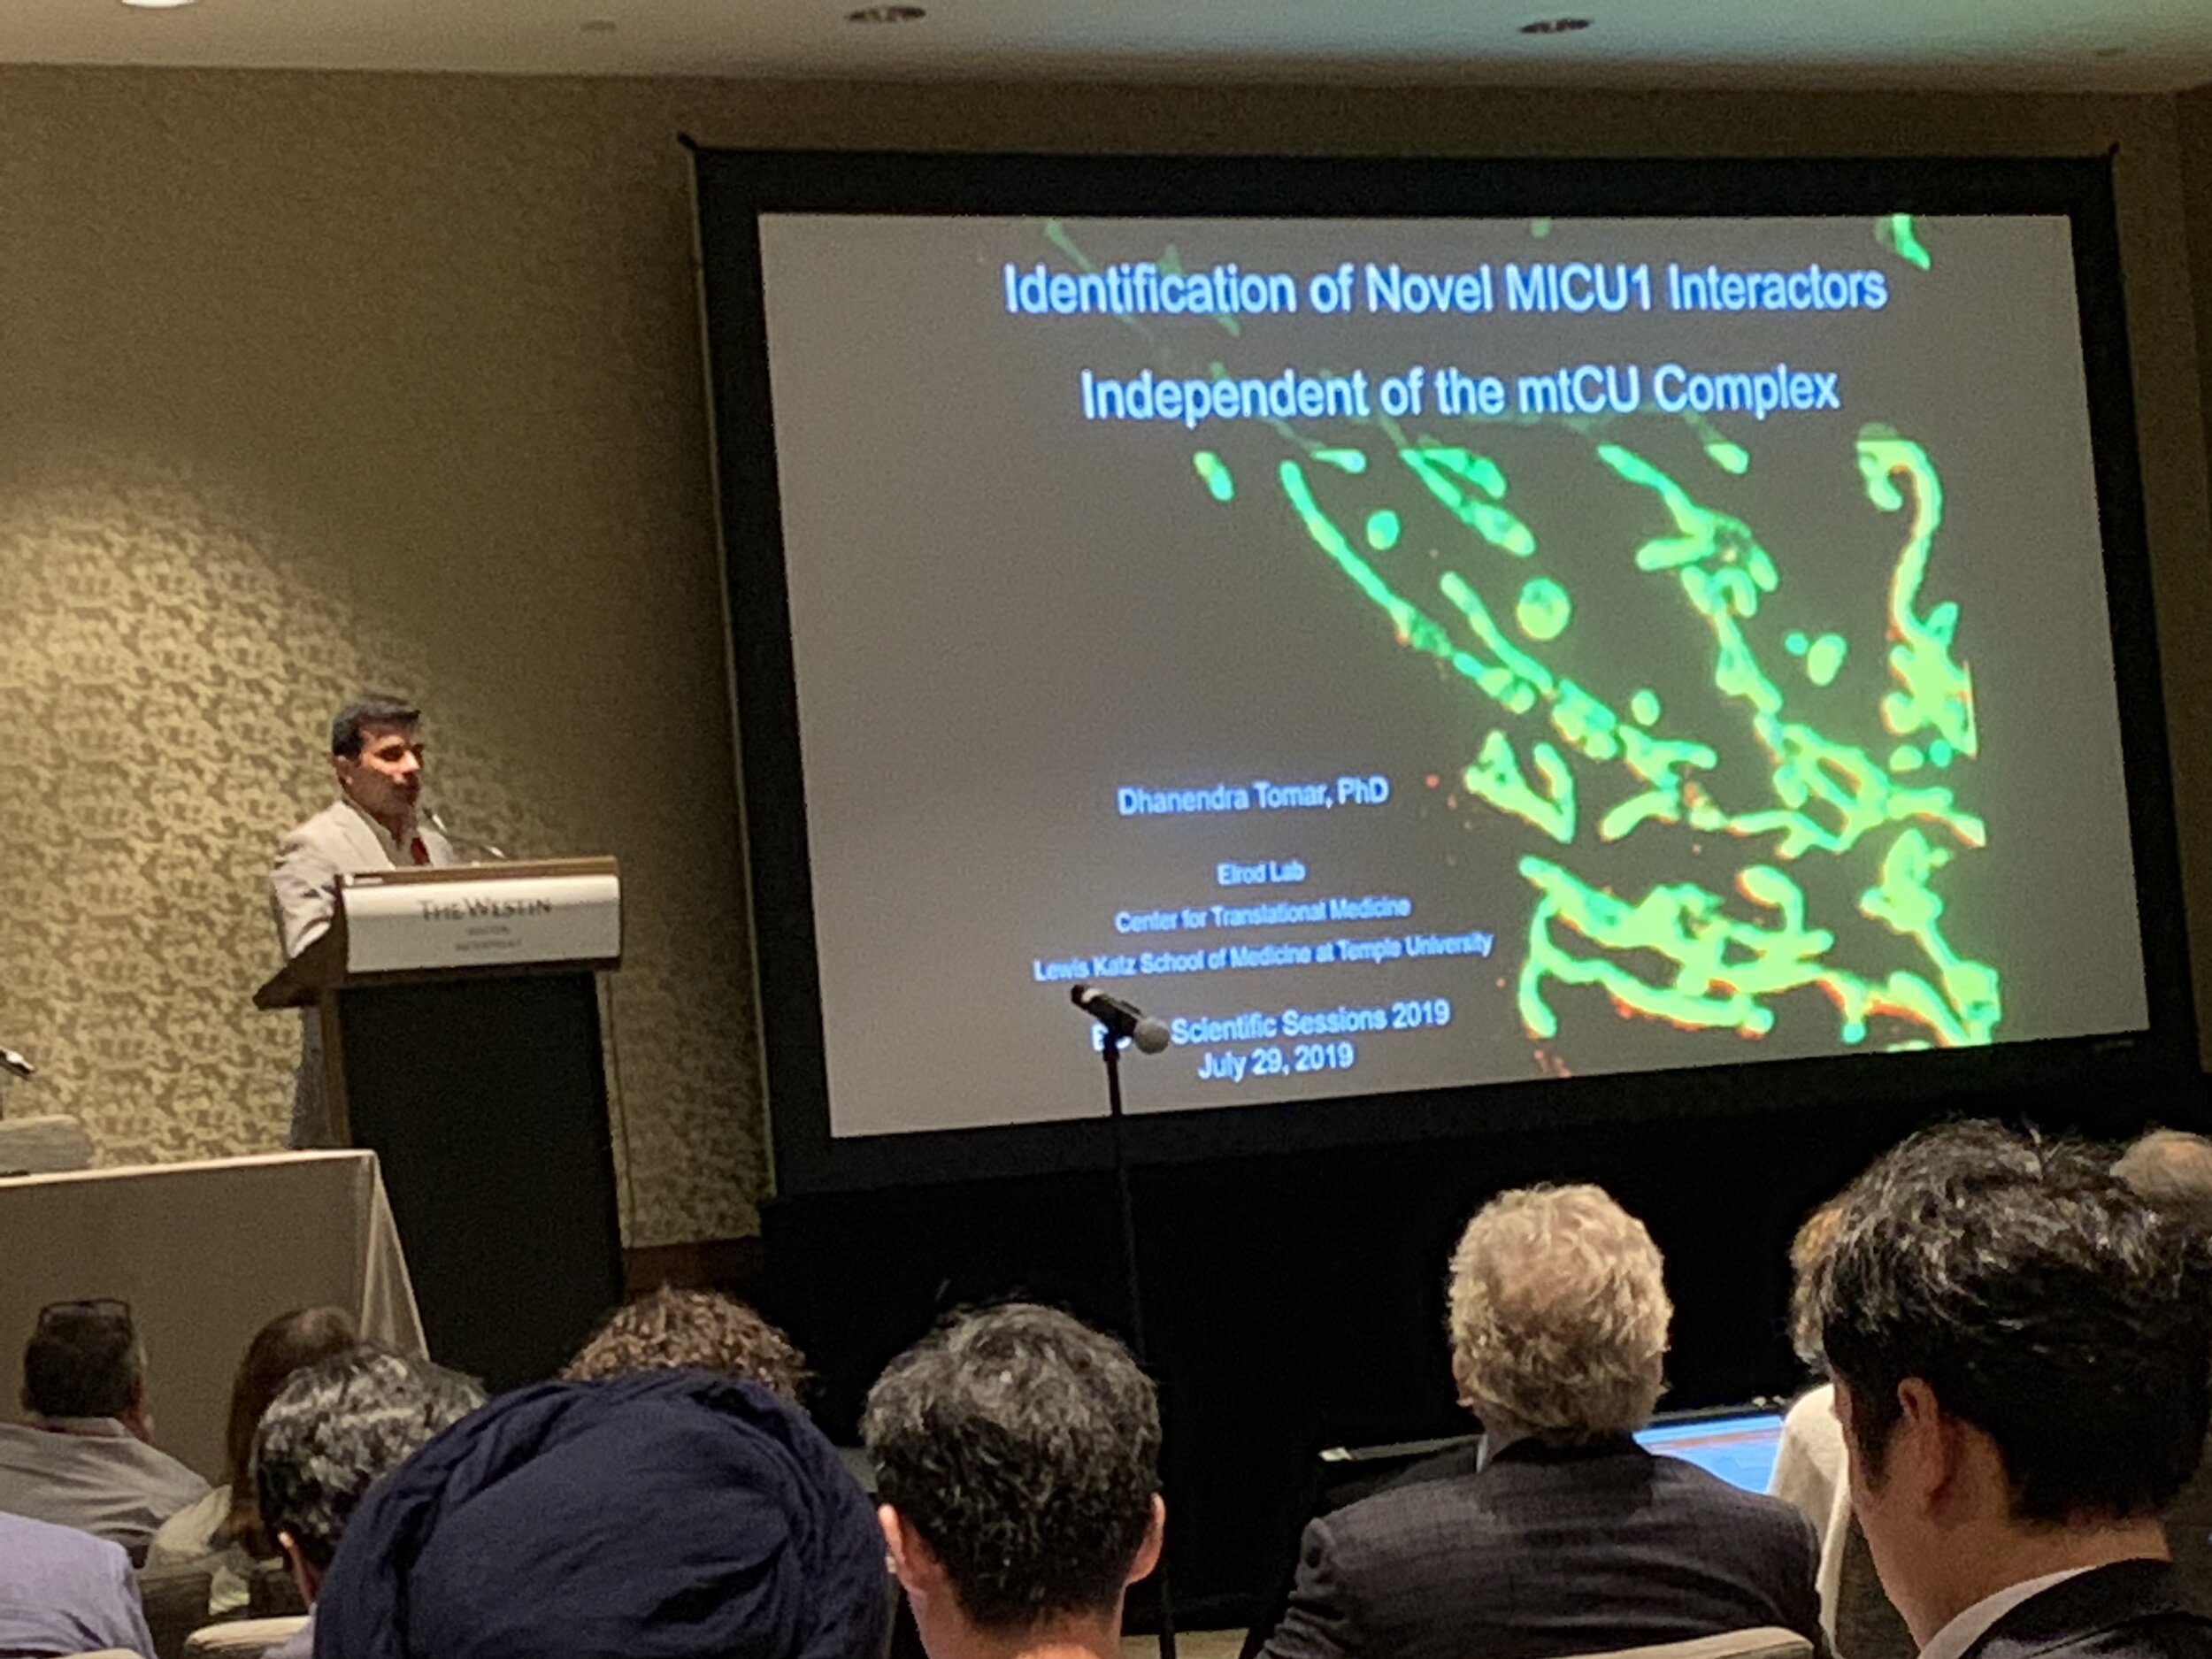 Dhanendra presenting on MICU1 in MICOS